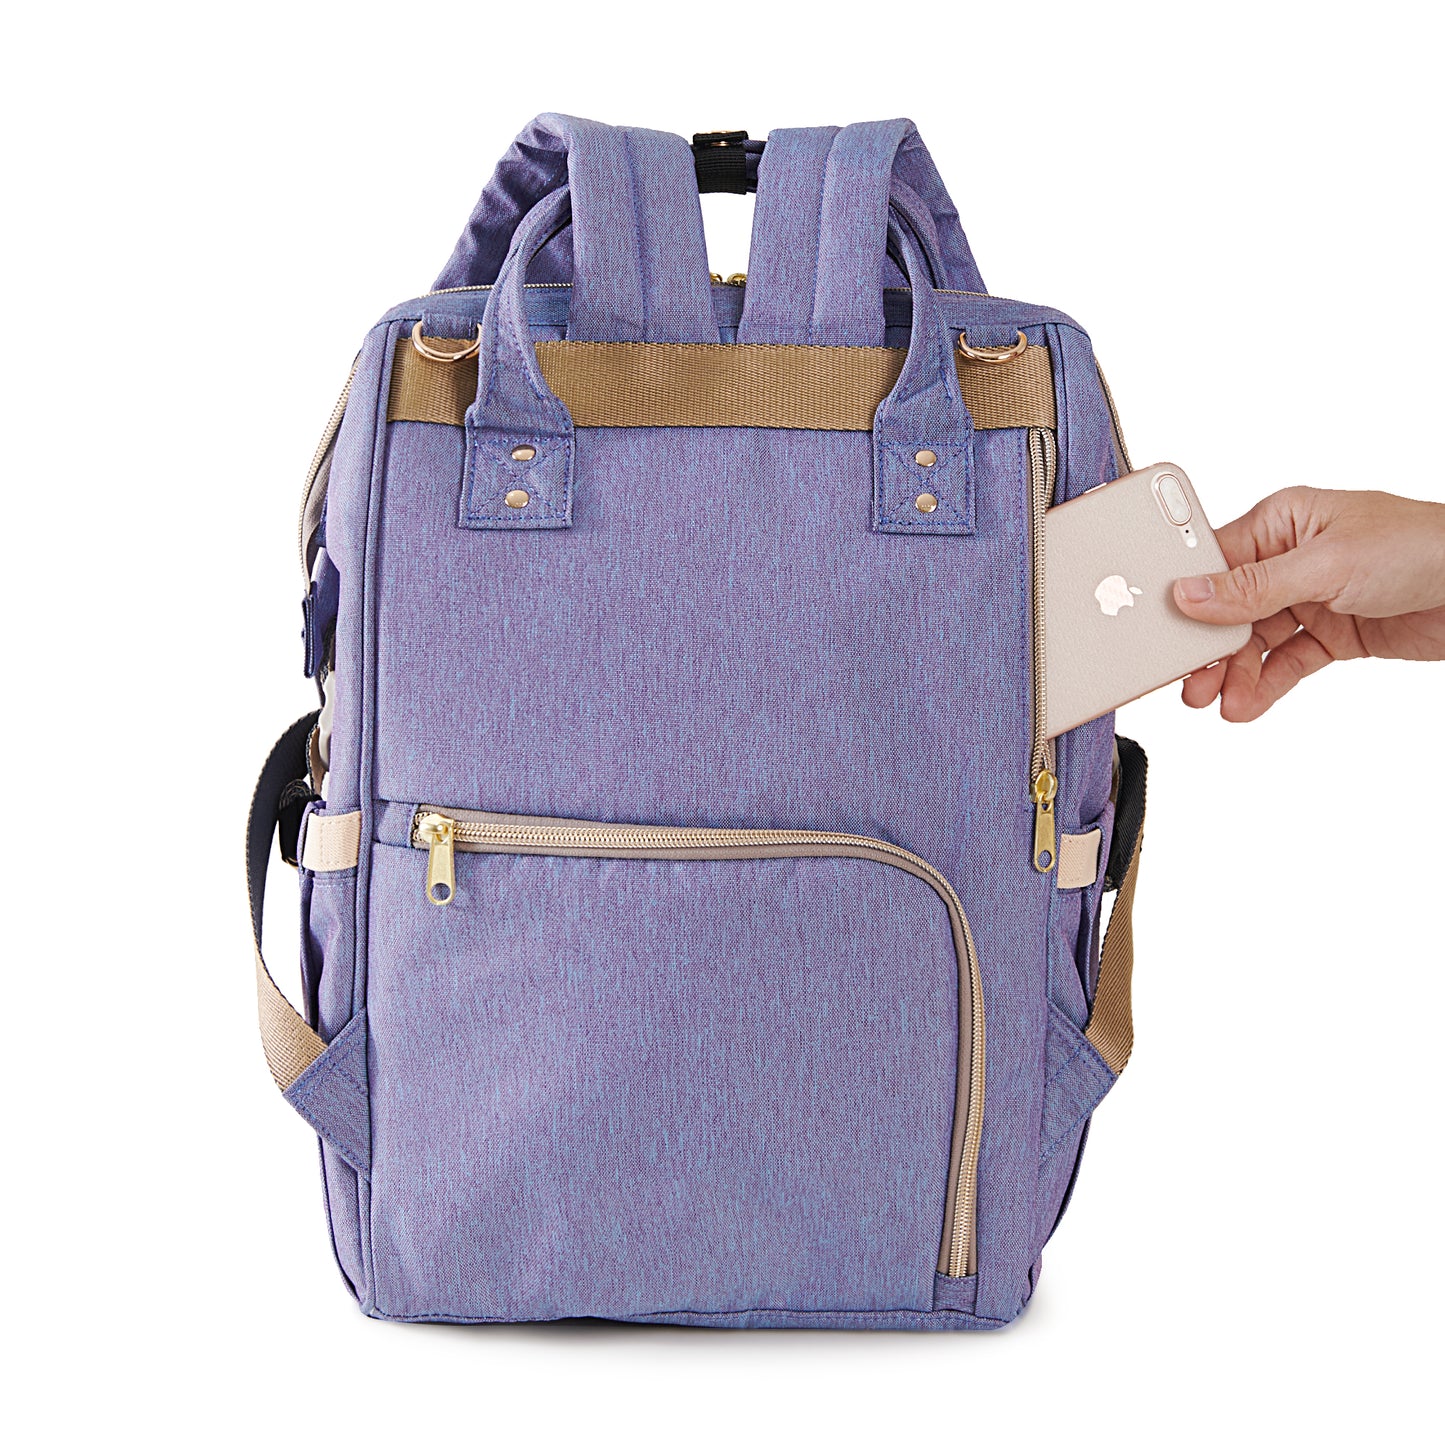 Classic Embroidered Diaper Backpack